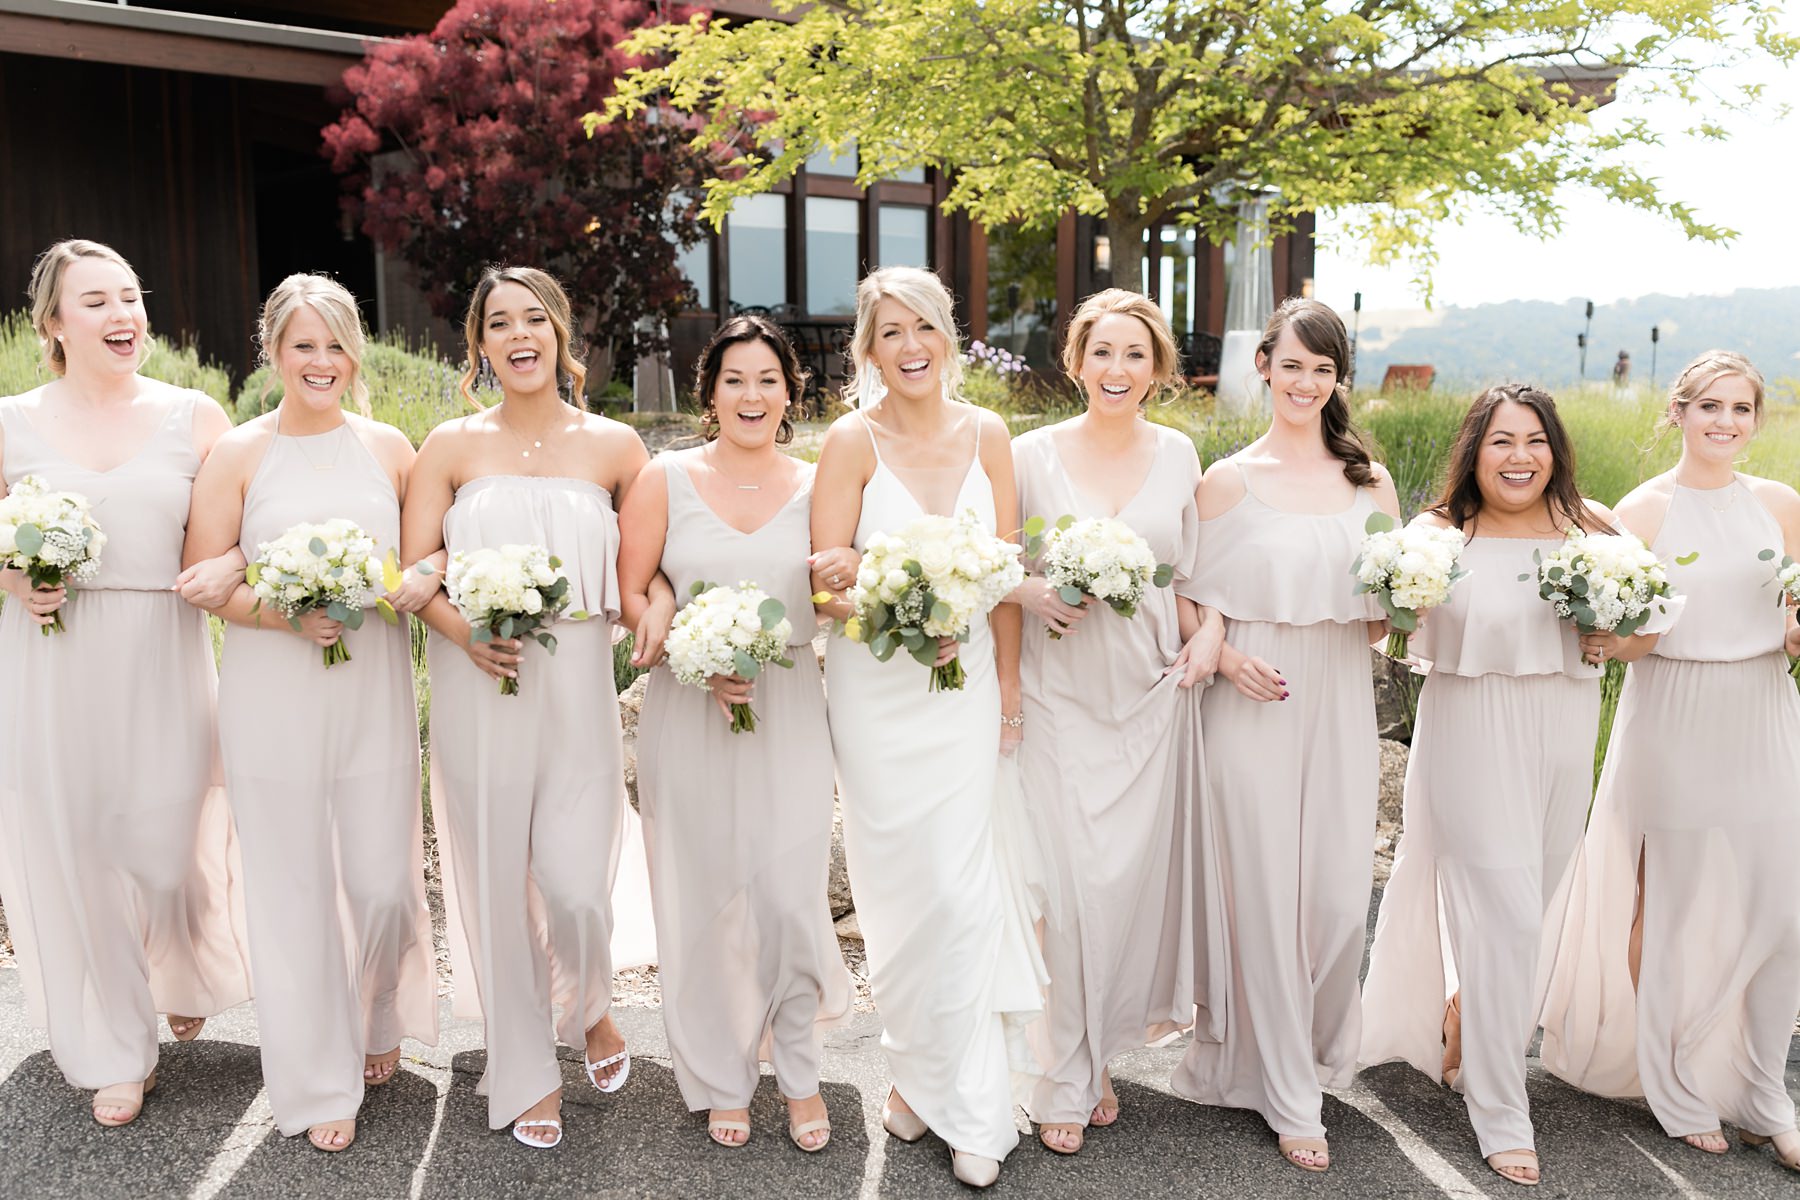 Bride and bridesmaids laugh and post together for portraits at Opolo winery wedding